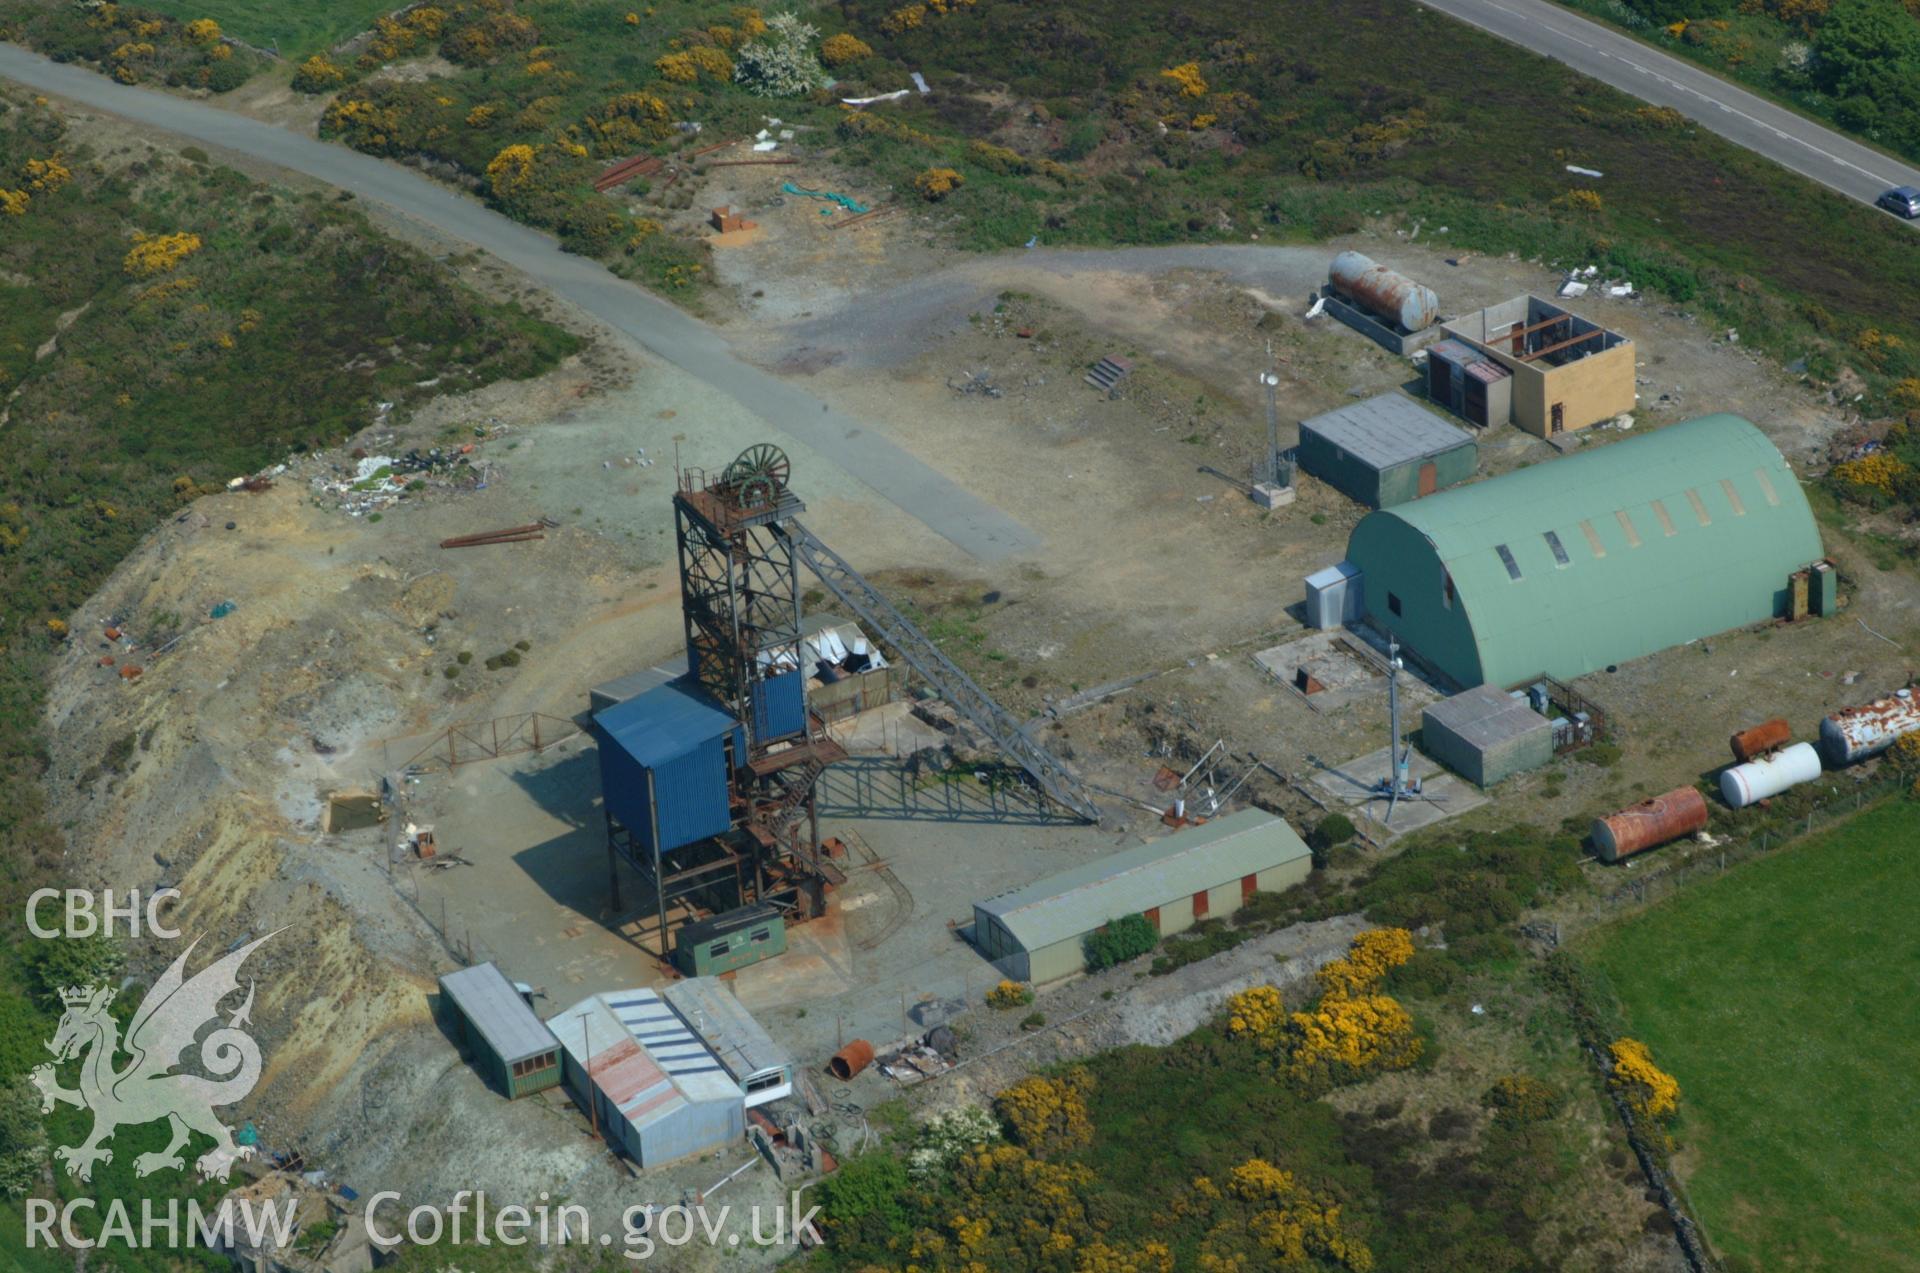 RCAHMW colour oblique aerial photograph of Winding Gear, Parys Mountain. Taken on 26 May 2004 by Toby Driver